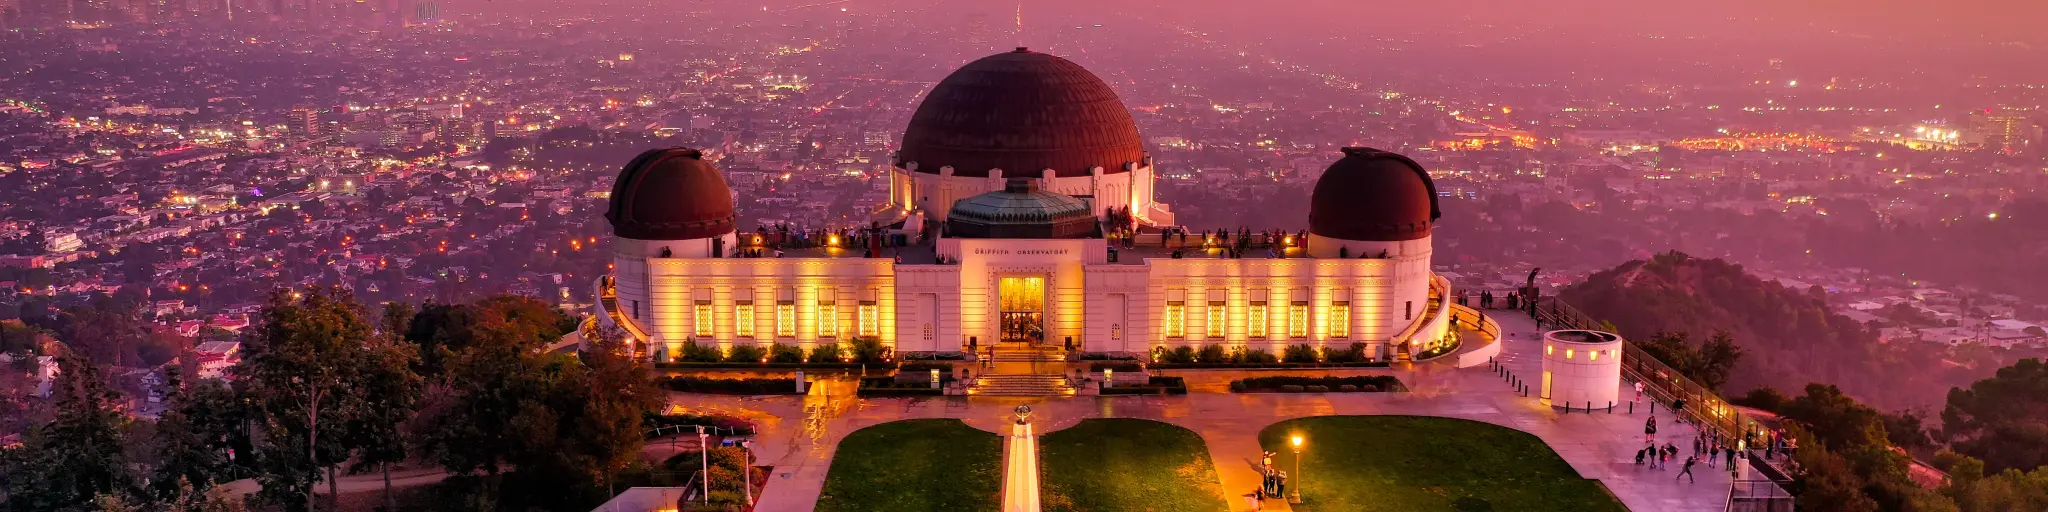 A very late pink sunset photo of Griffith Observatory with all the lights of the building turned on